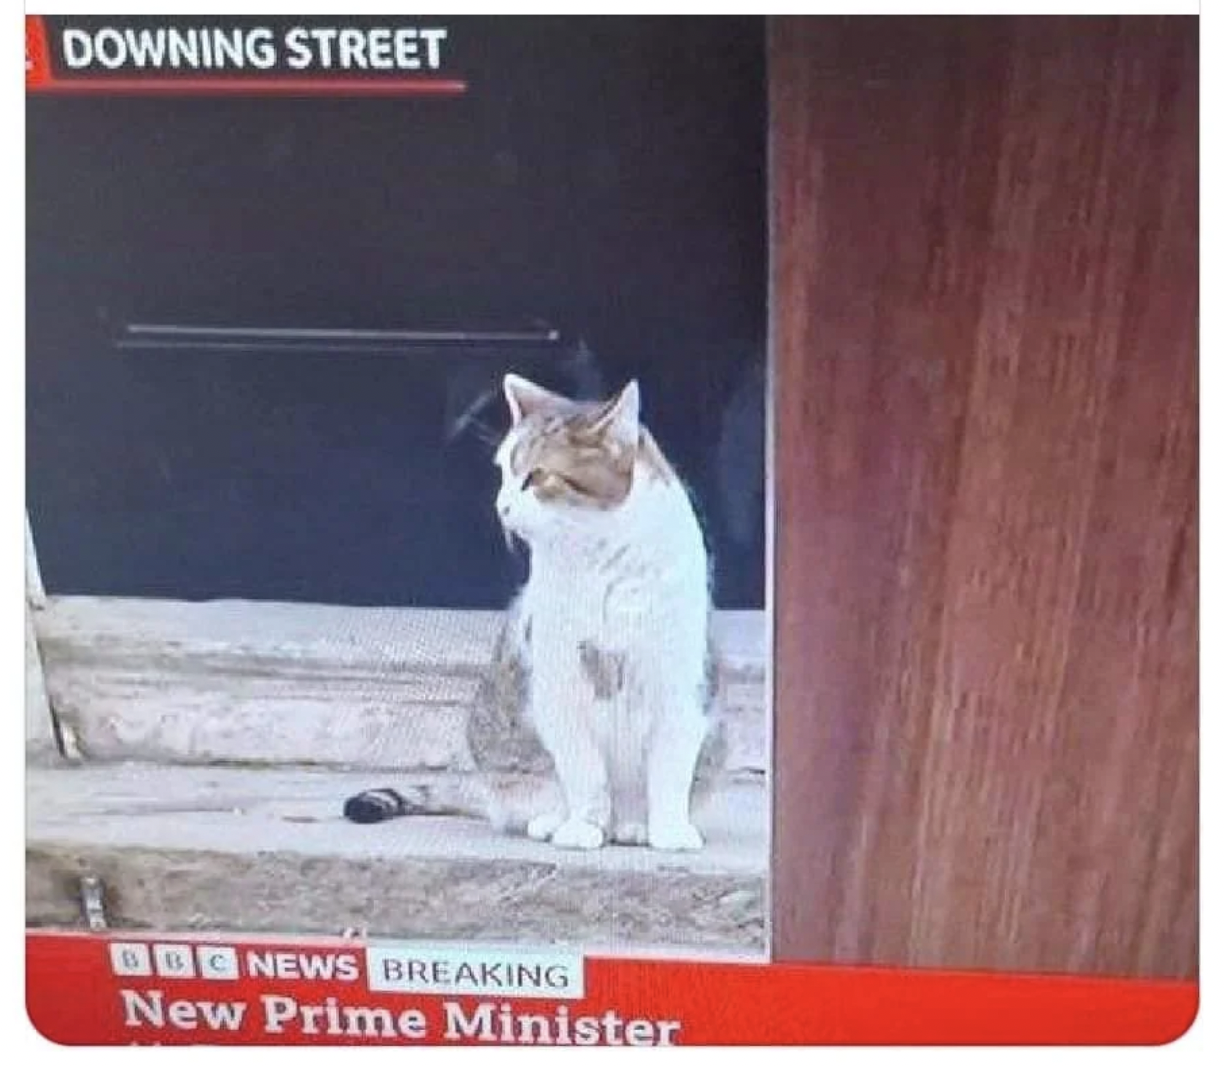 aegean cat - Downing Street Bbc News Breaking New Prime Minister